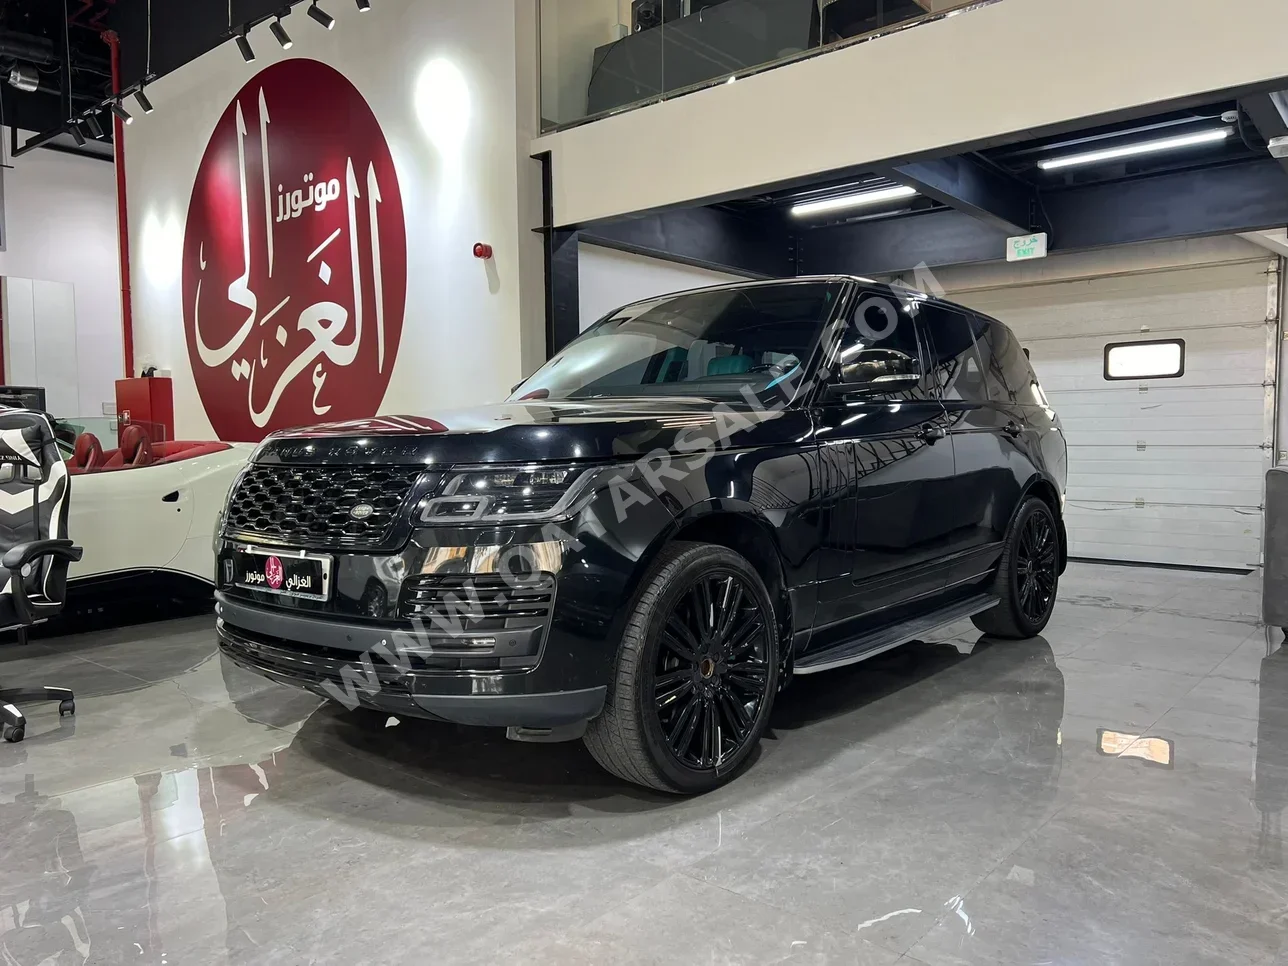 Land Rover  Range Rover  Vogue  2014  Automatic  196,000 Km  8 Cylinder  Four Wheel Drive (4WD)  SUV  Black